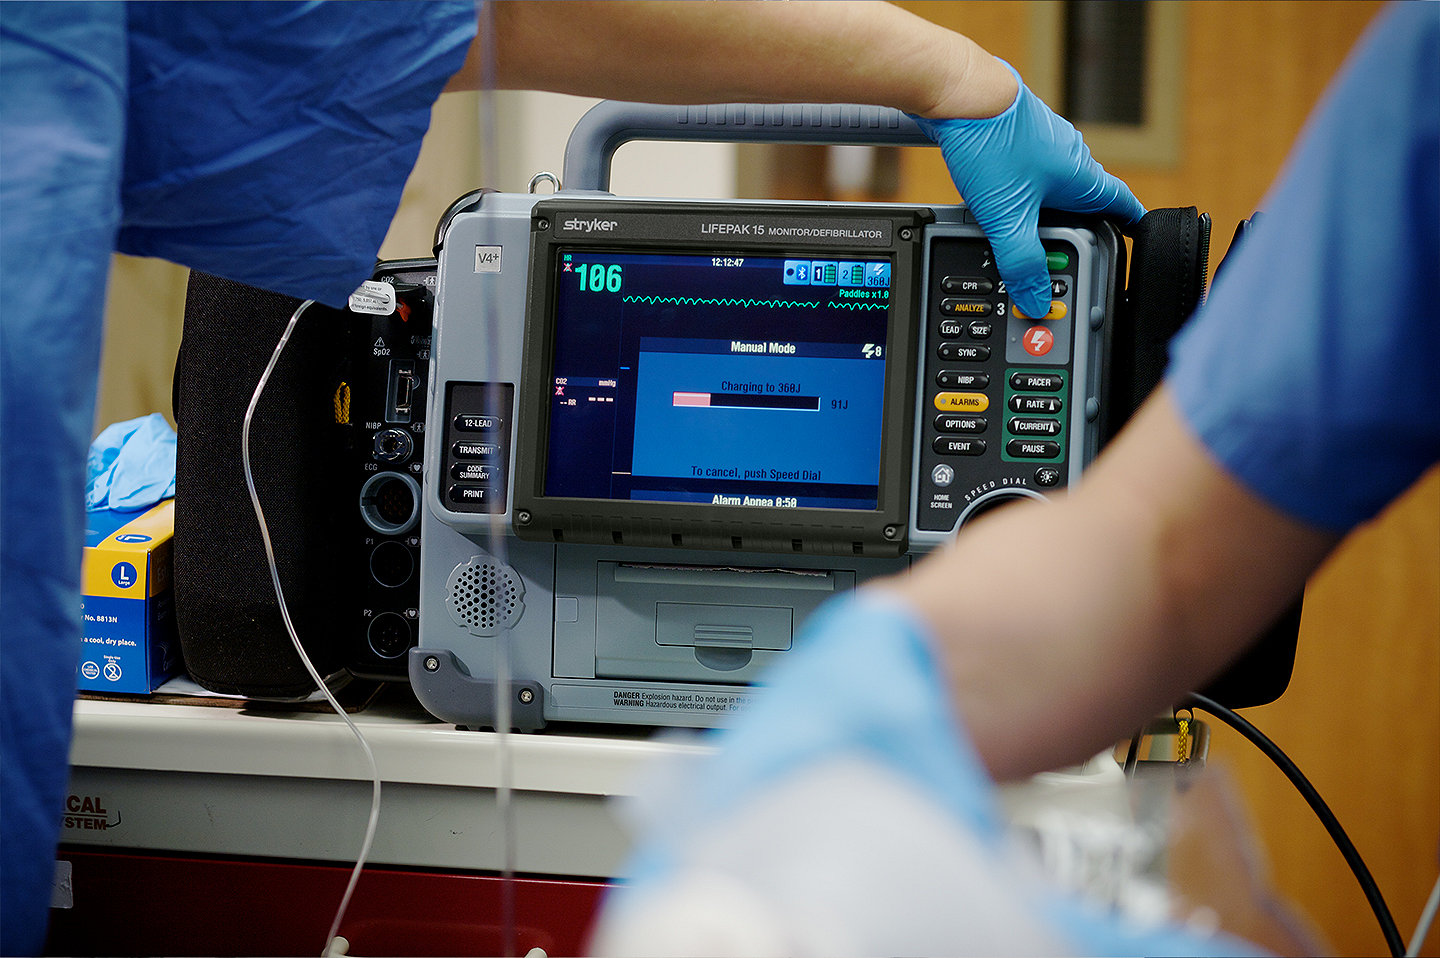 A LIFEPAK 15 monitor/defibrillator is placed on a stretcher while it monitors the patient 